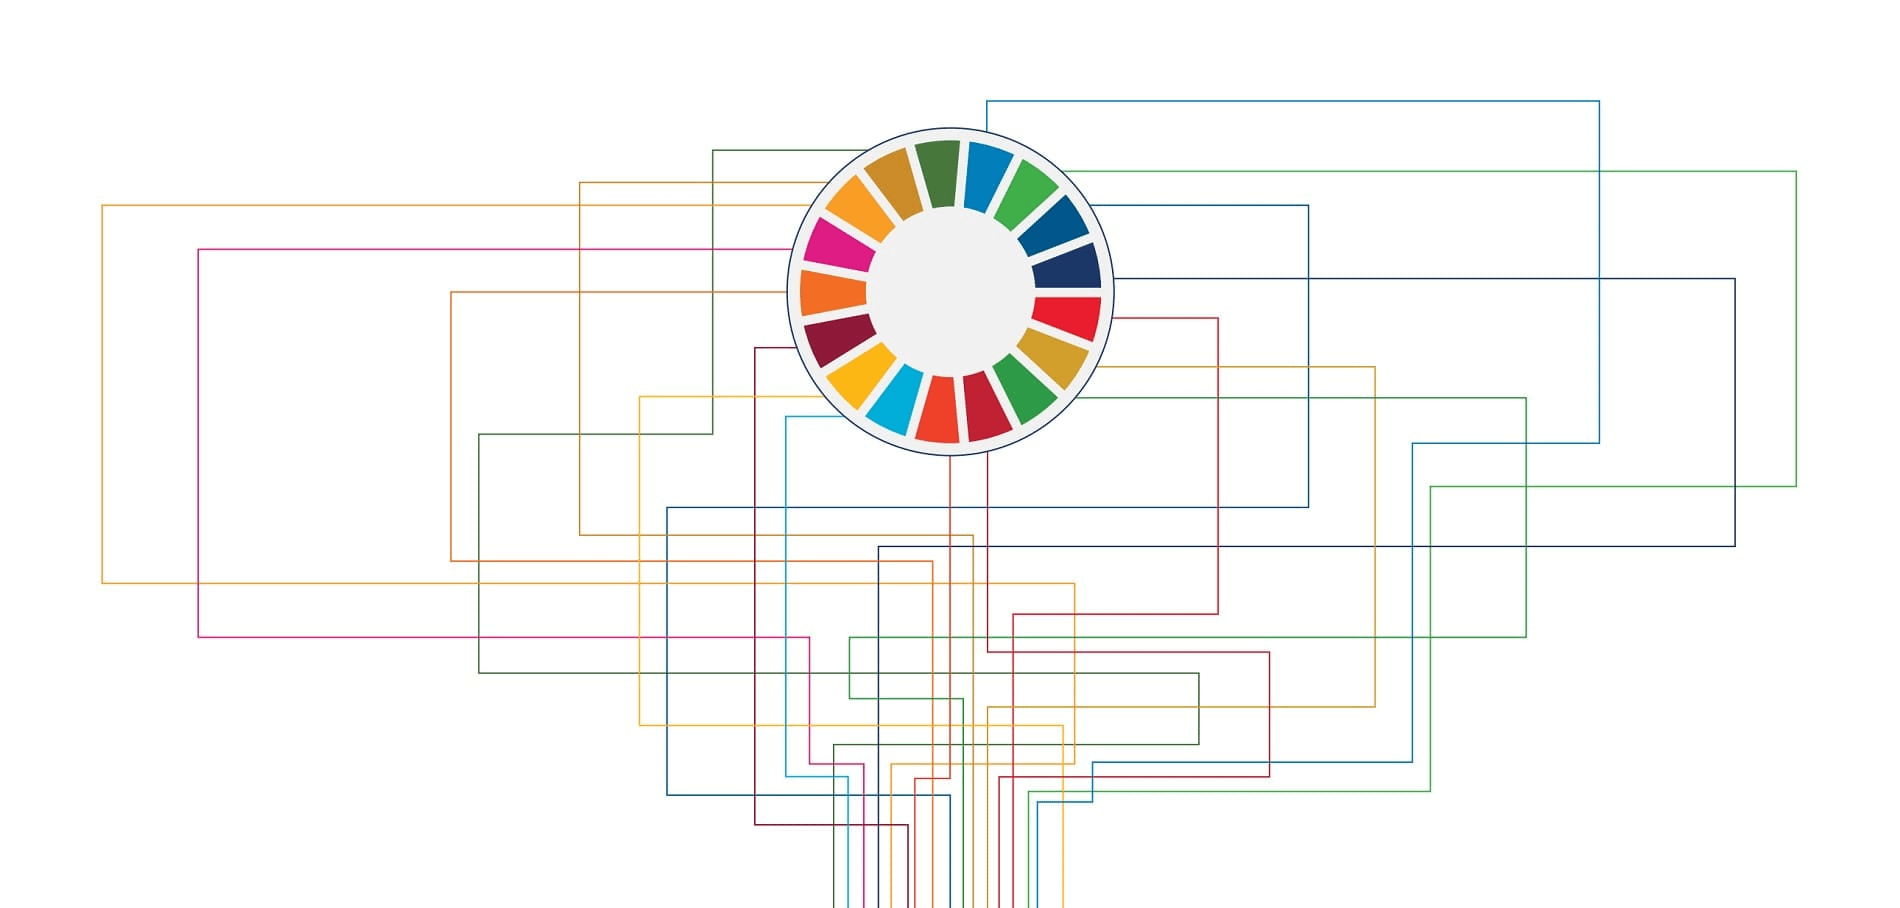 Image from the 2023 SDG Progress Report